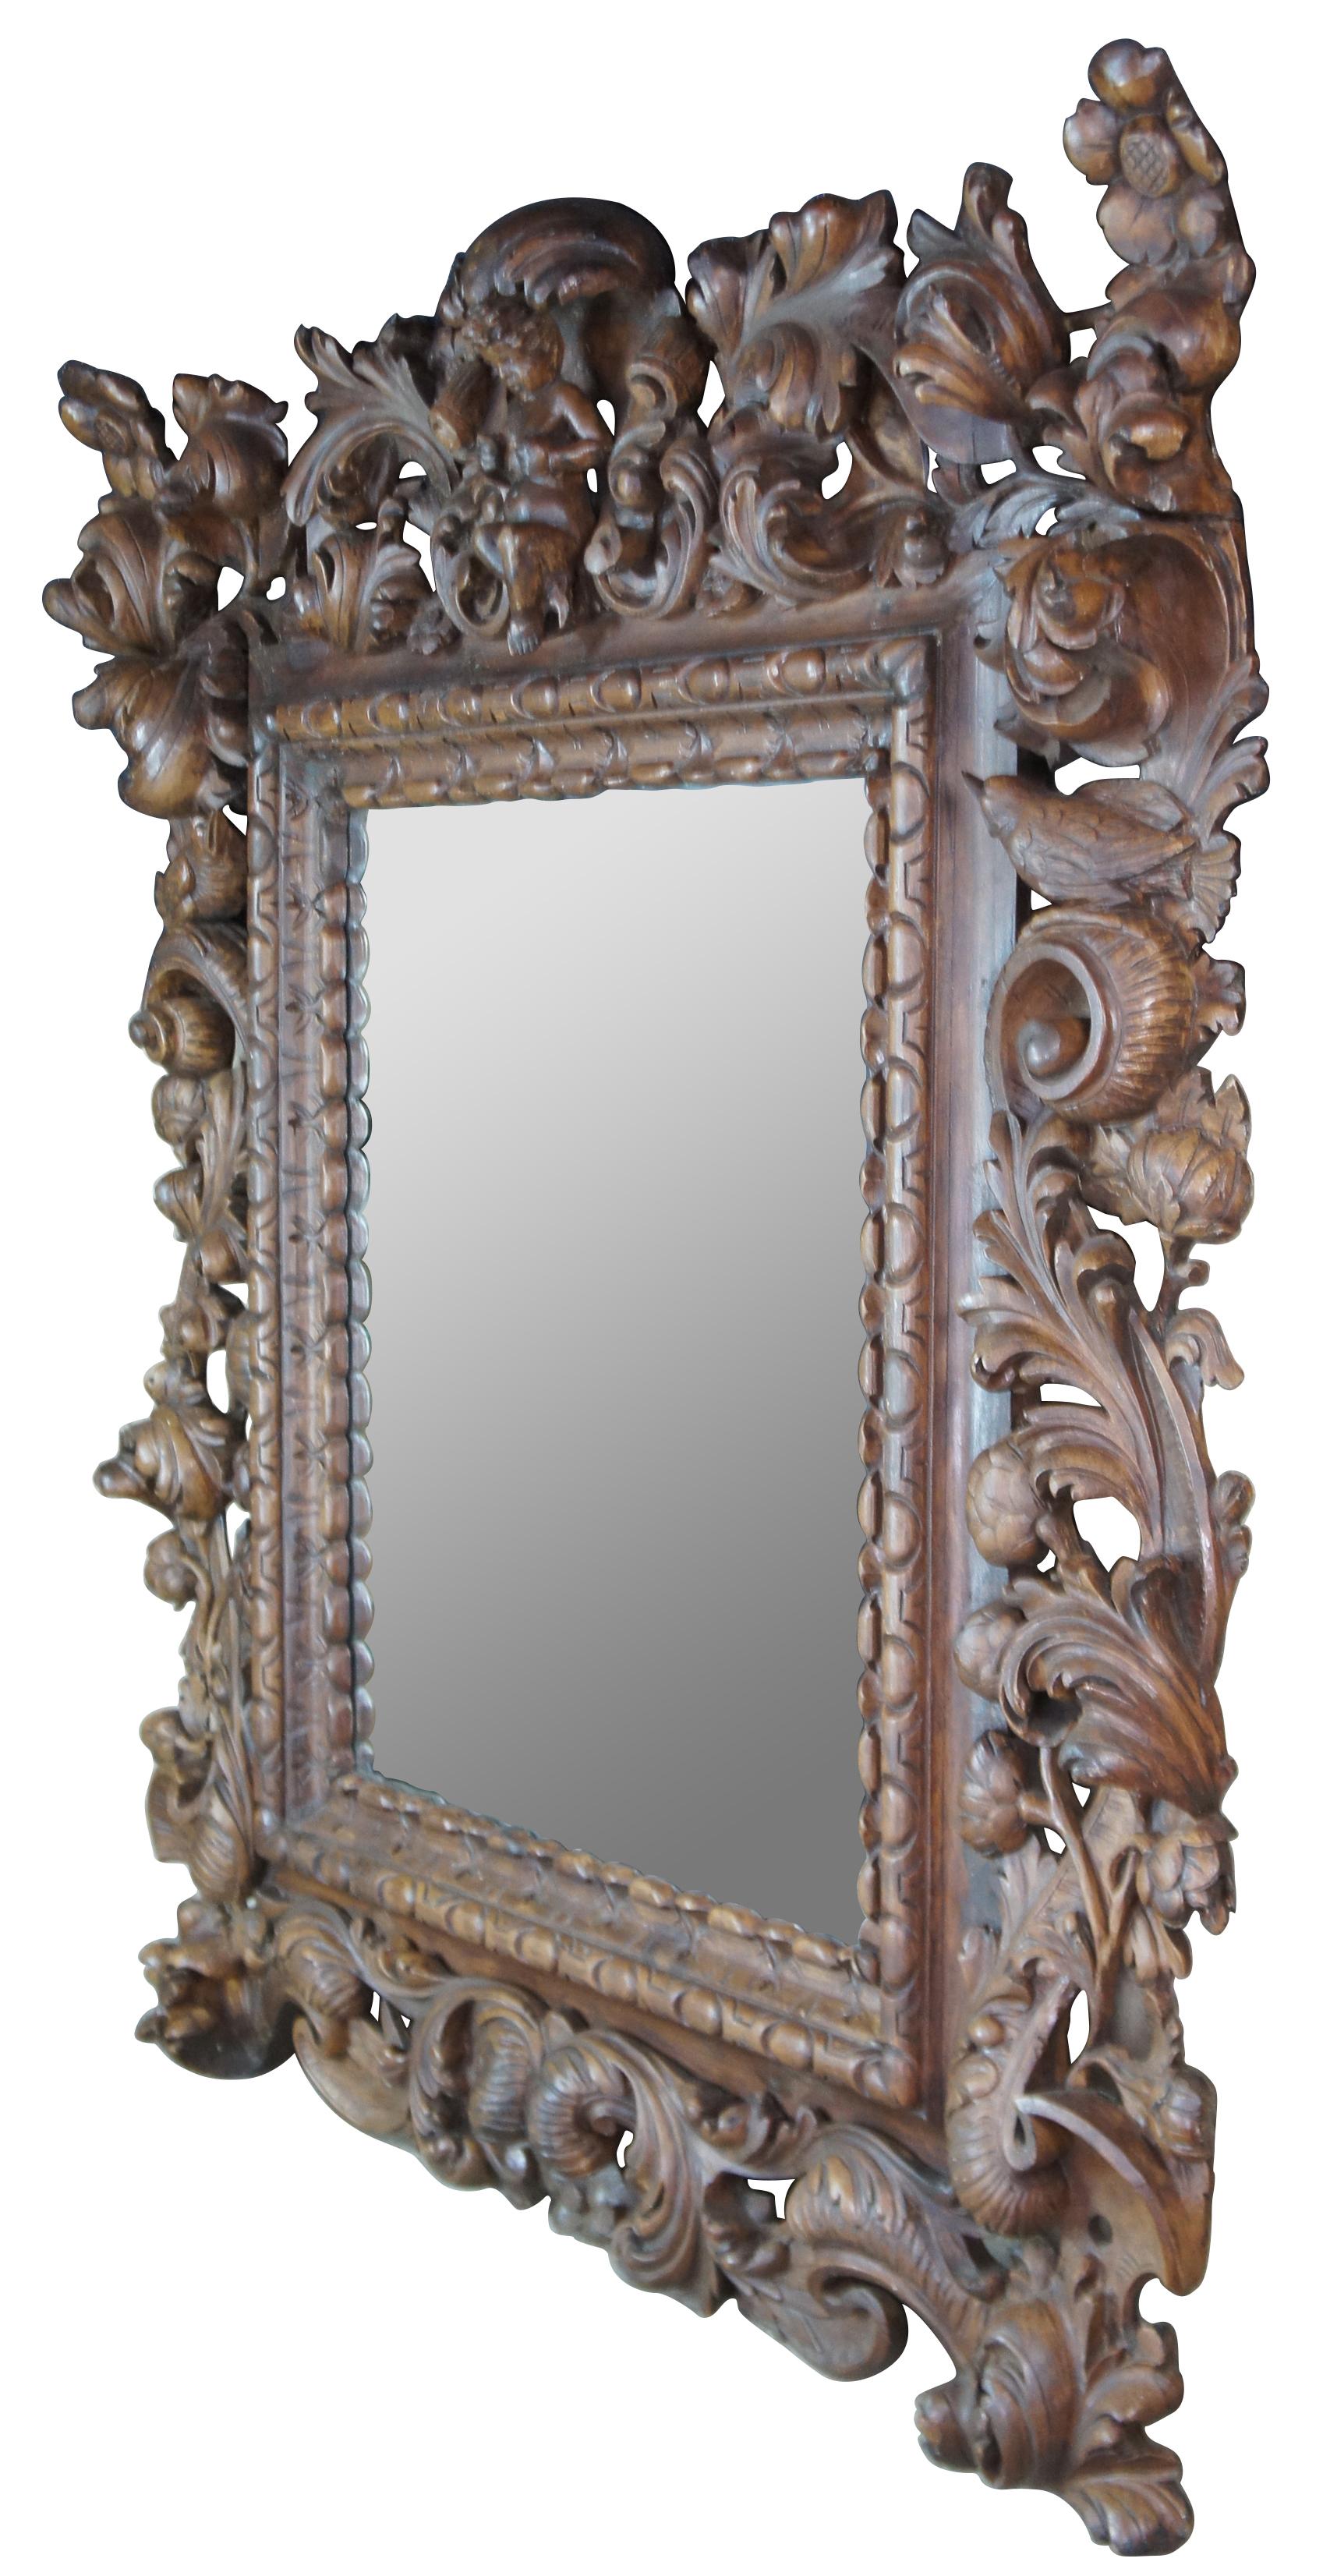 Impressive monumental Italian baroque or rococo wall mirror. Made of hard wood with rectangular form featuring heavy high relief / reticulated carvings of a cherub flanked by two birds with scrolled flowers and acanthus leaves. Measure: 74